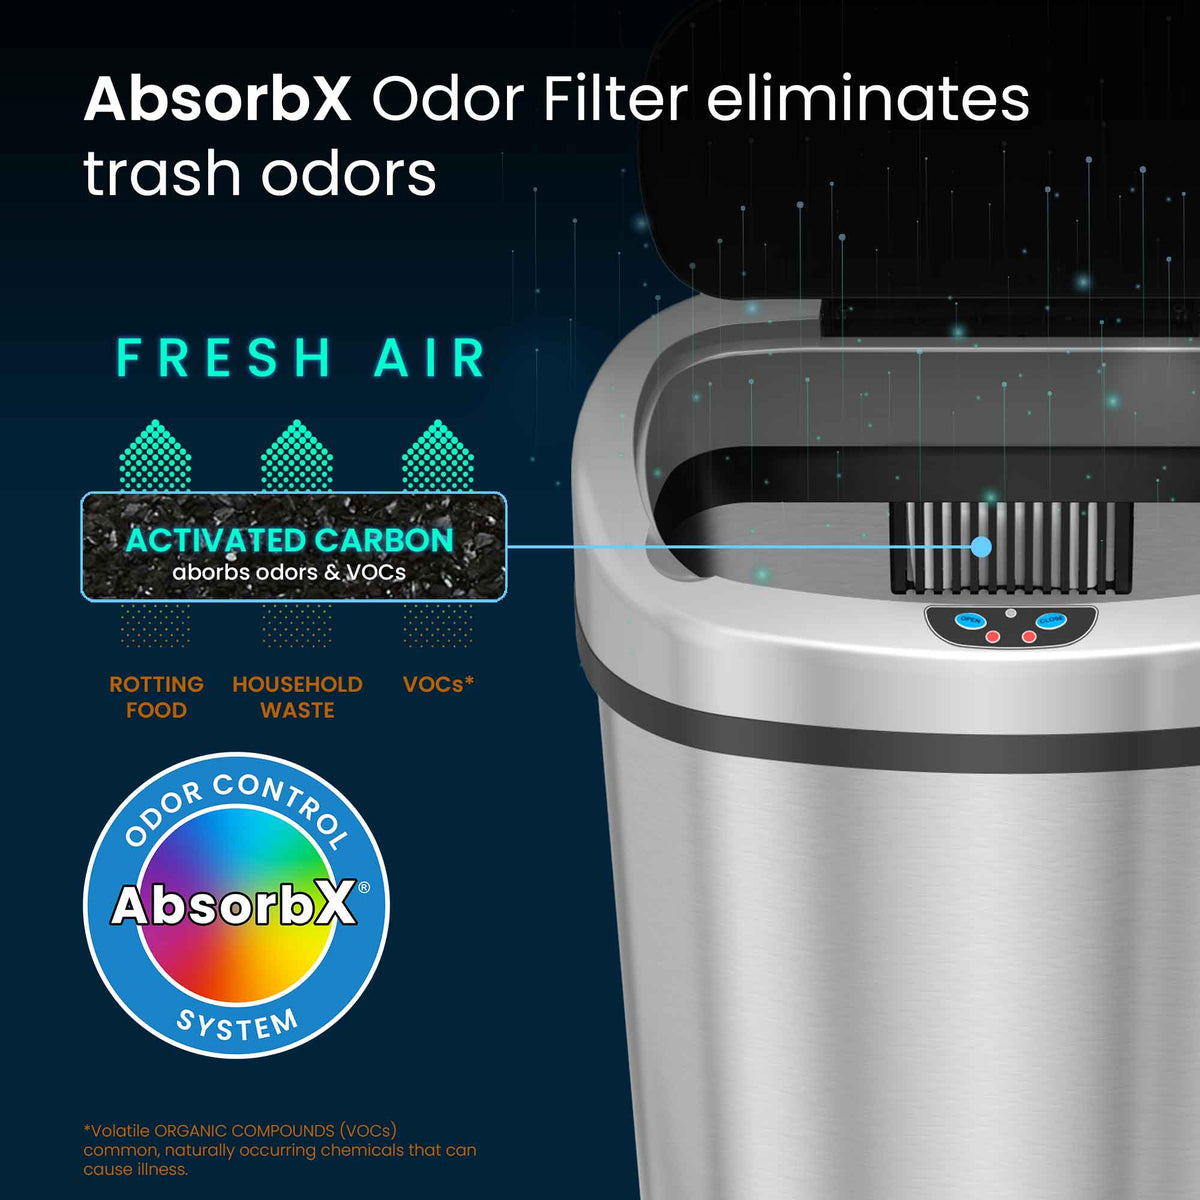 iTouchless 13 Gallon Oval Sensor Trash Can with Odor Filter eliminates trash odors